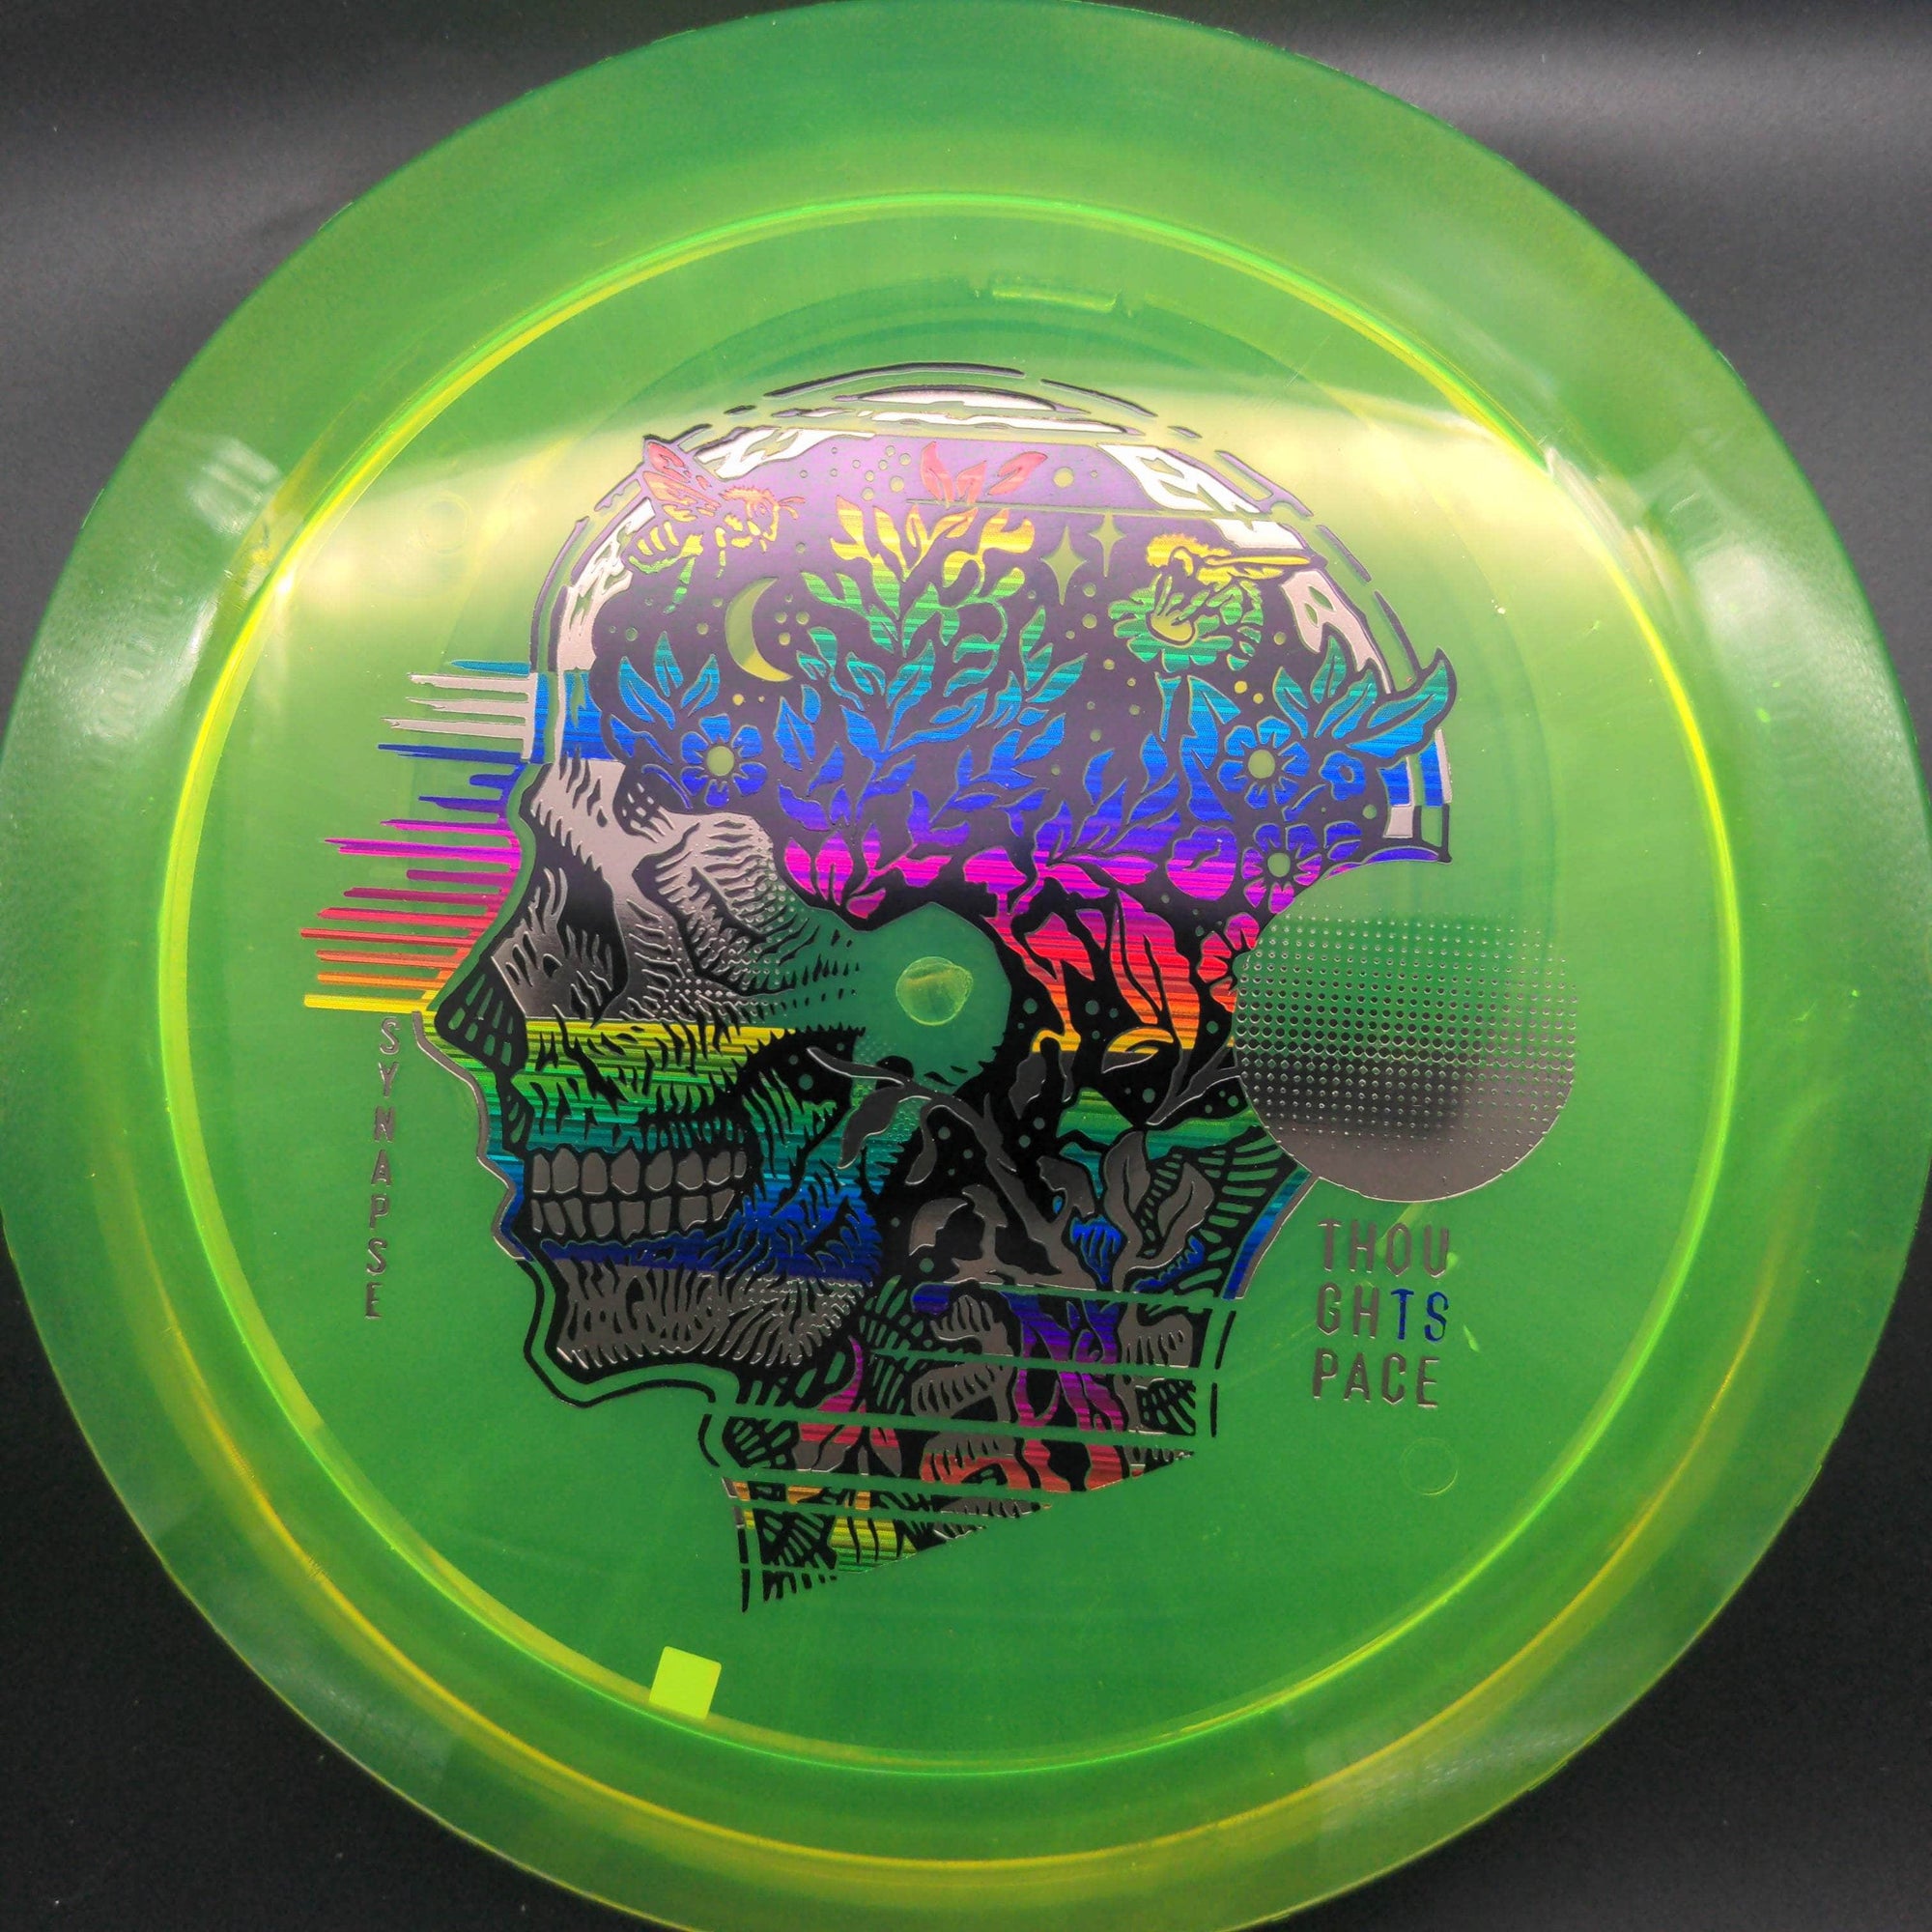 Thought Space Athletics Distance Driver Synapse, Ethos Plastic